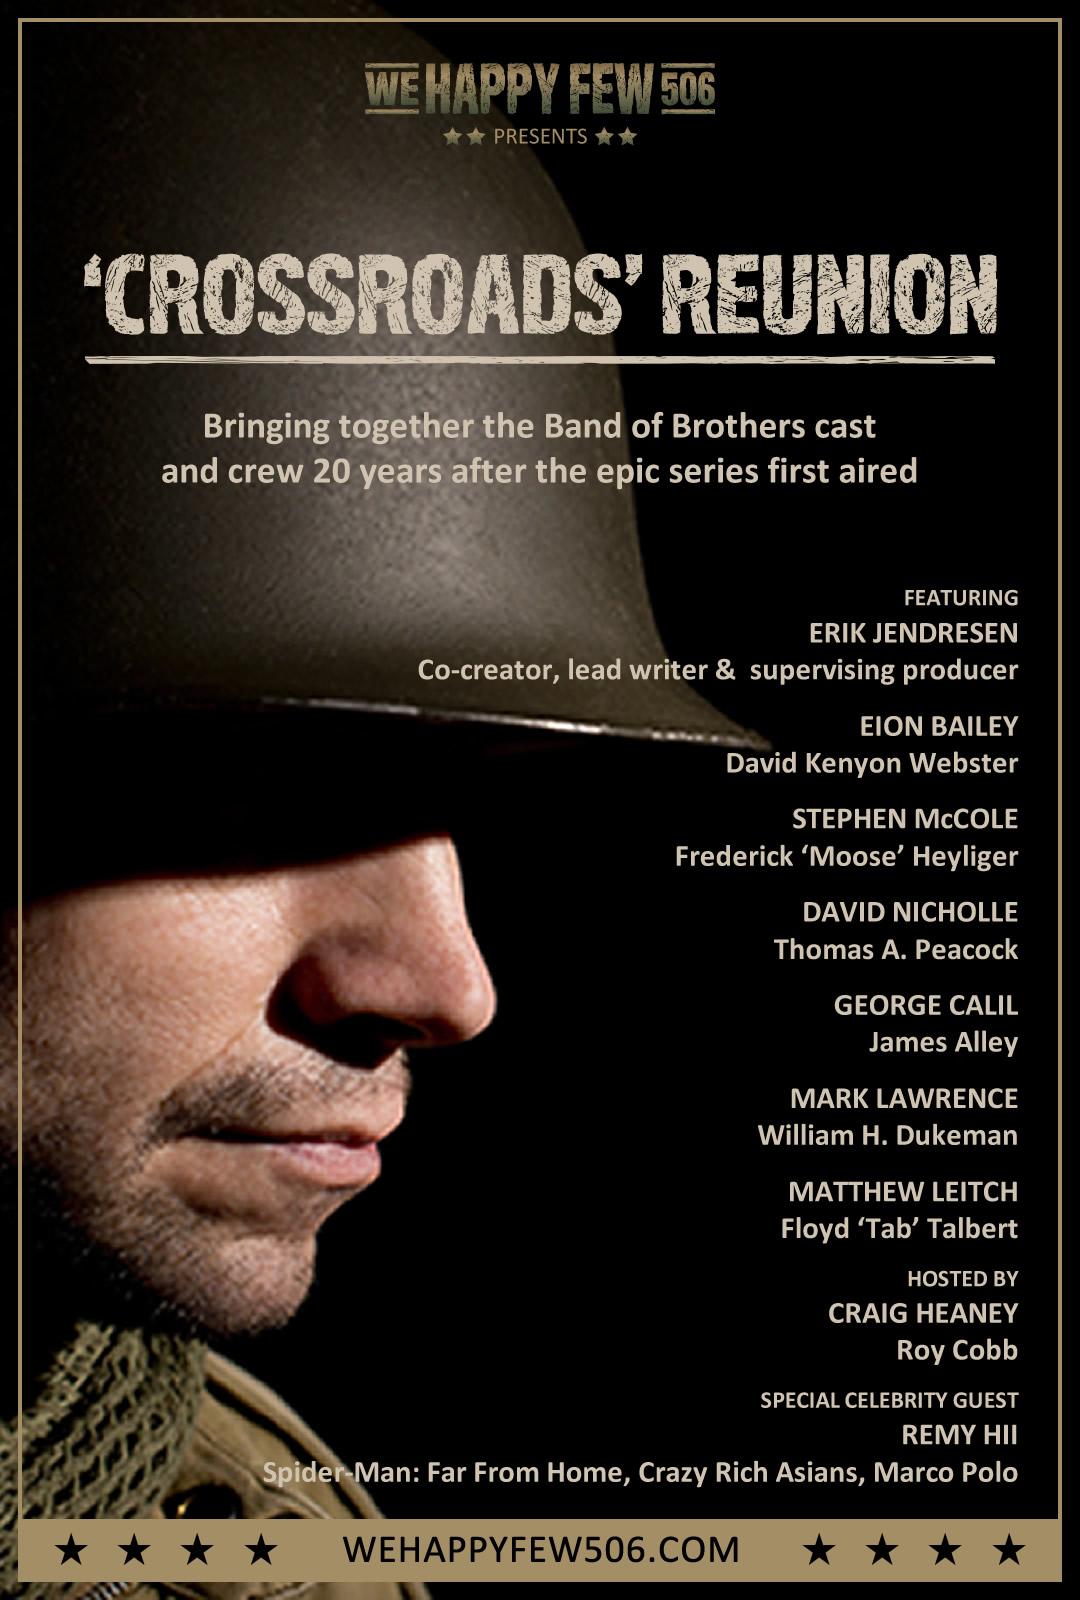 Band of Brothers 'Crossroads' Reunion - ENDED